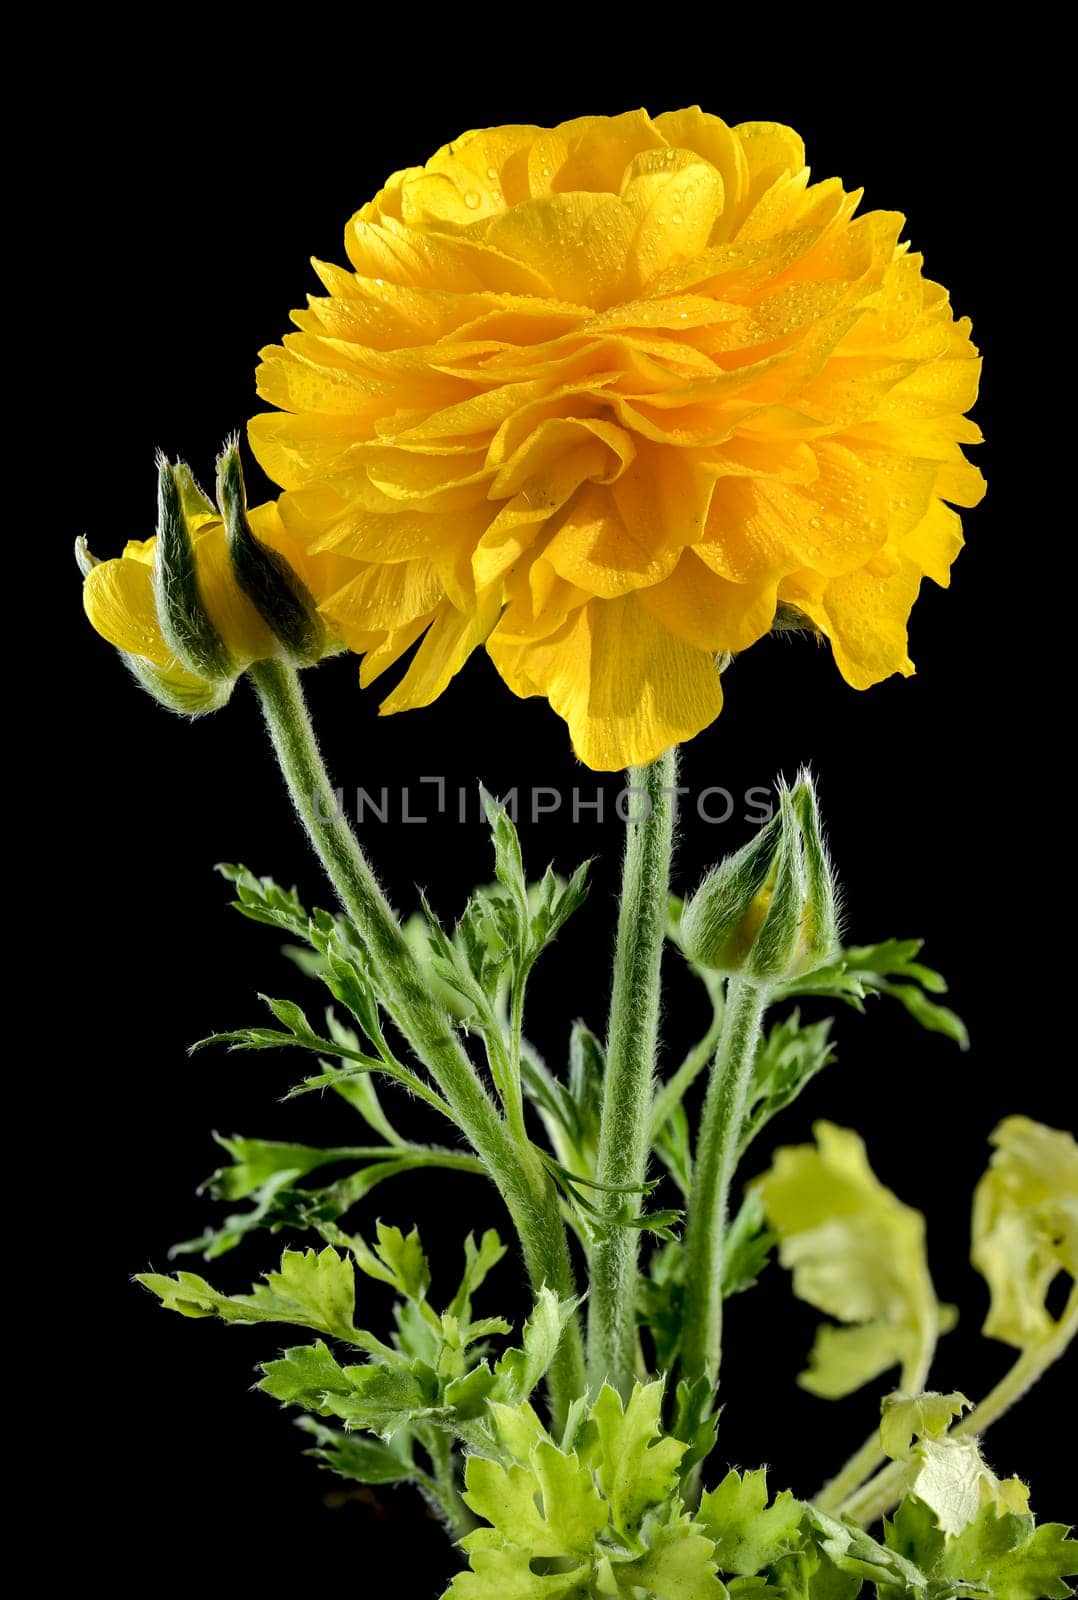 Beautiful blooming yellow ranunculus flower isolated on a black background. Flower head close-up.